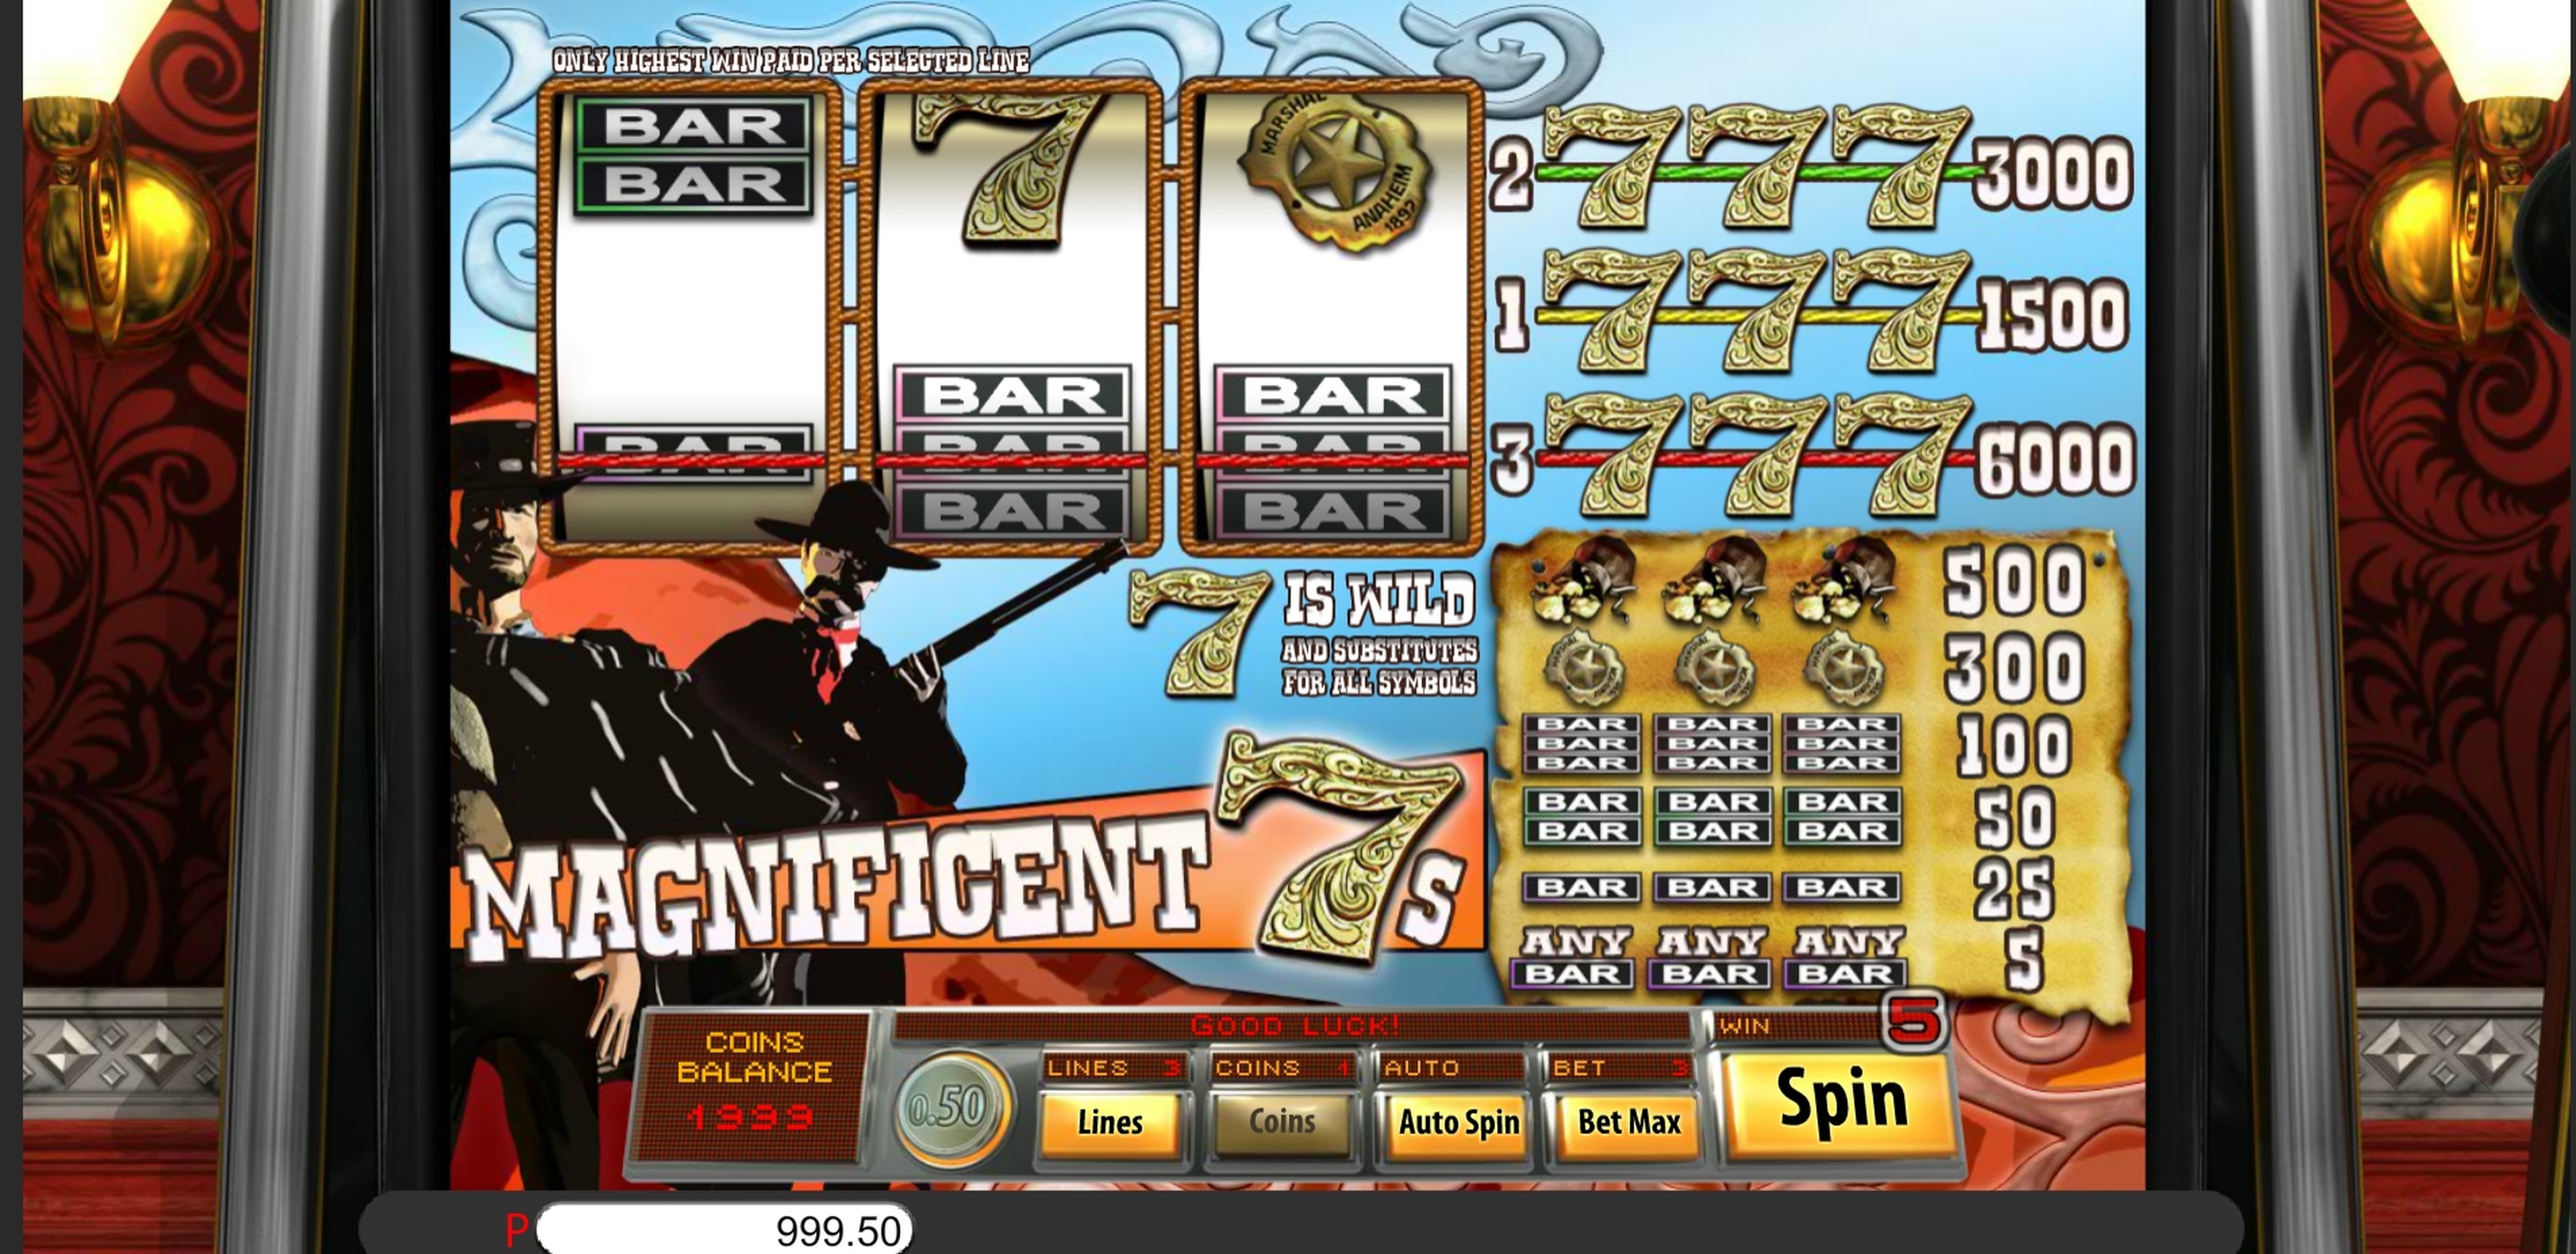 Win Money in Magnificent 7s Free Slot Game by saucify